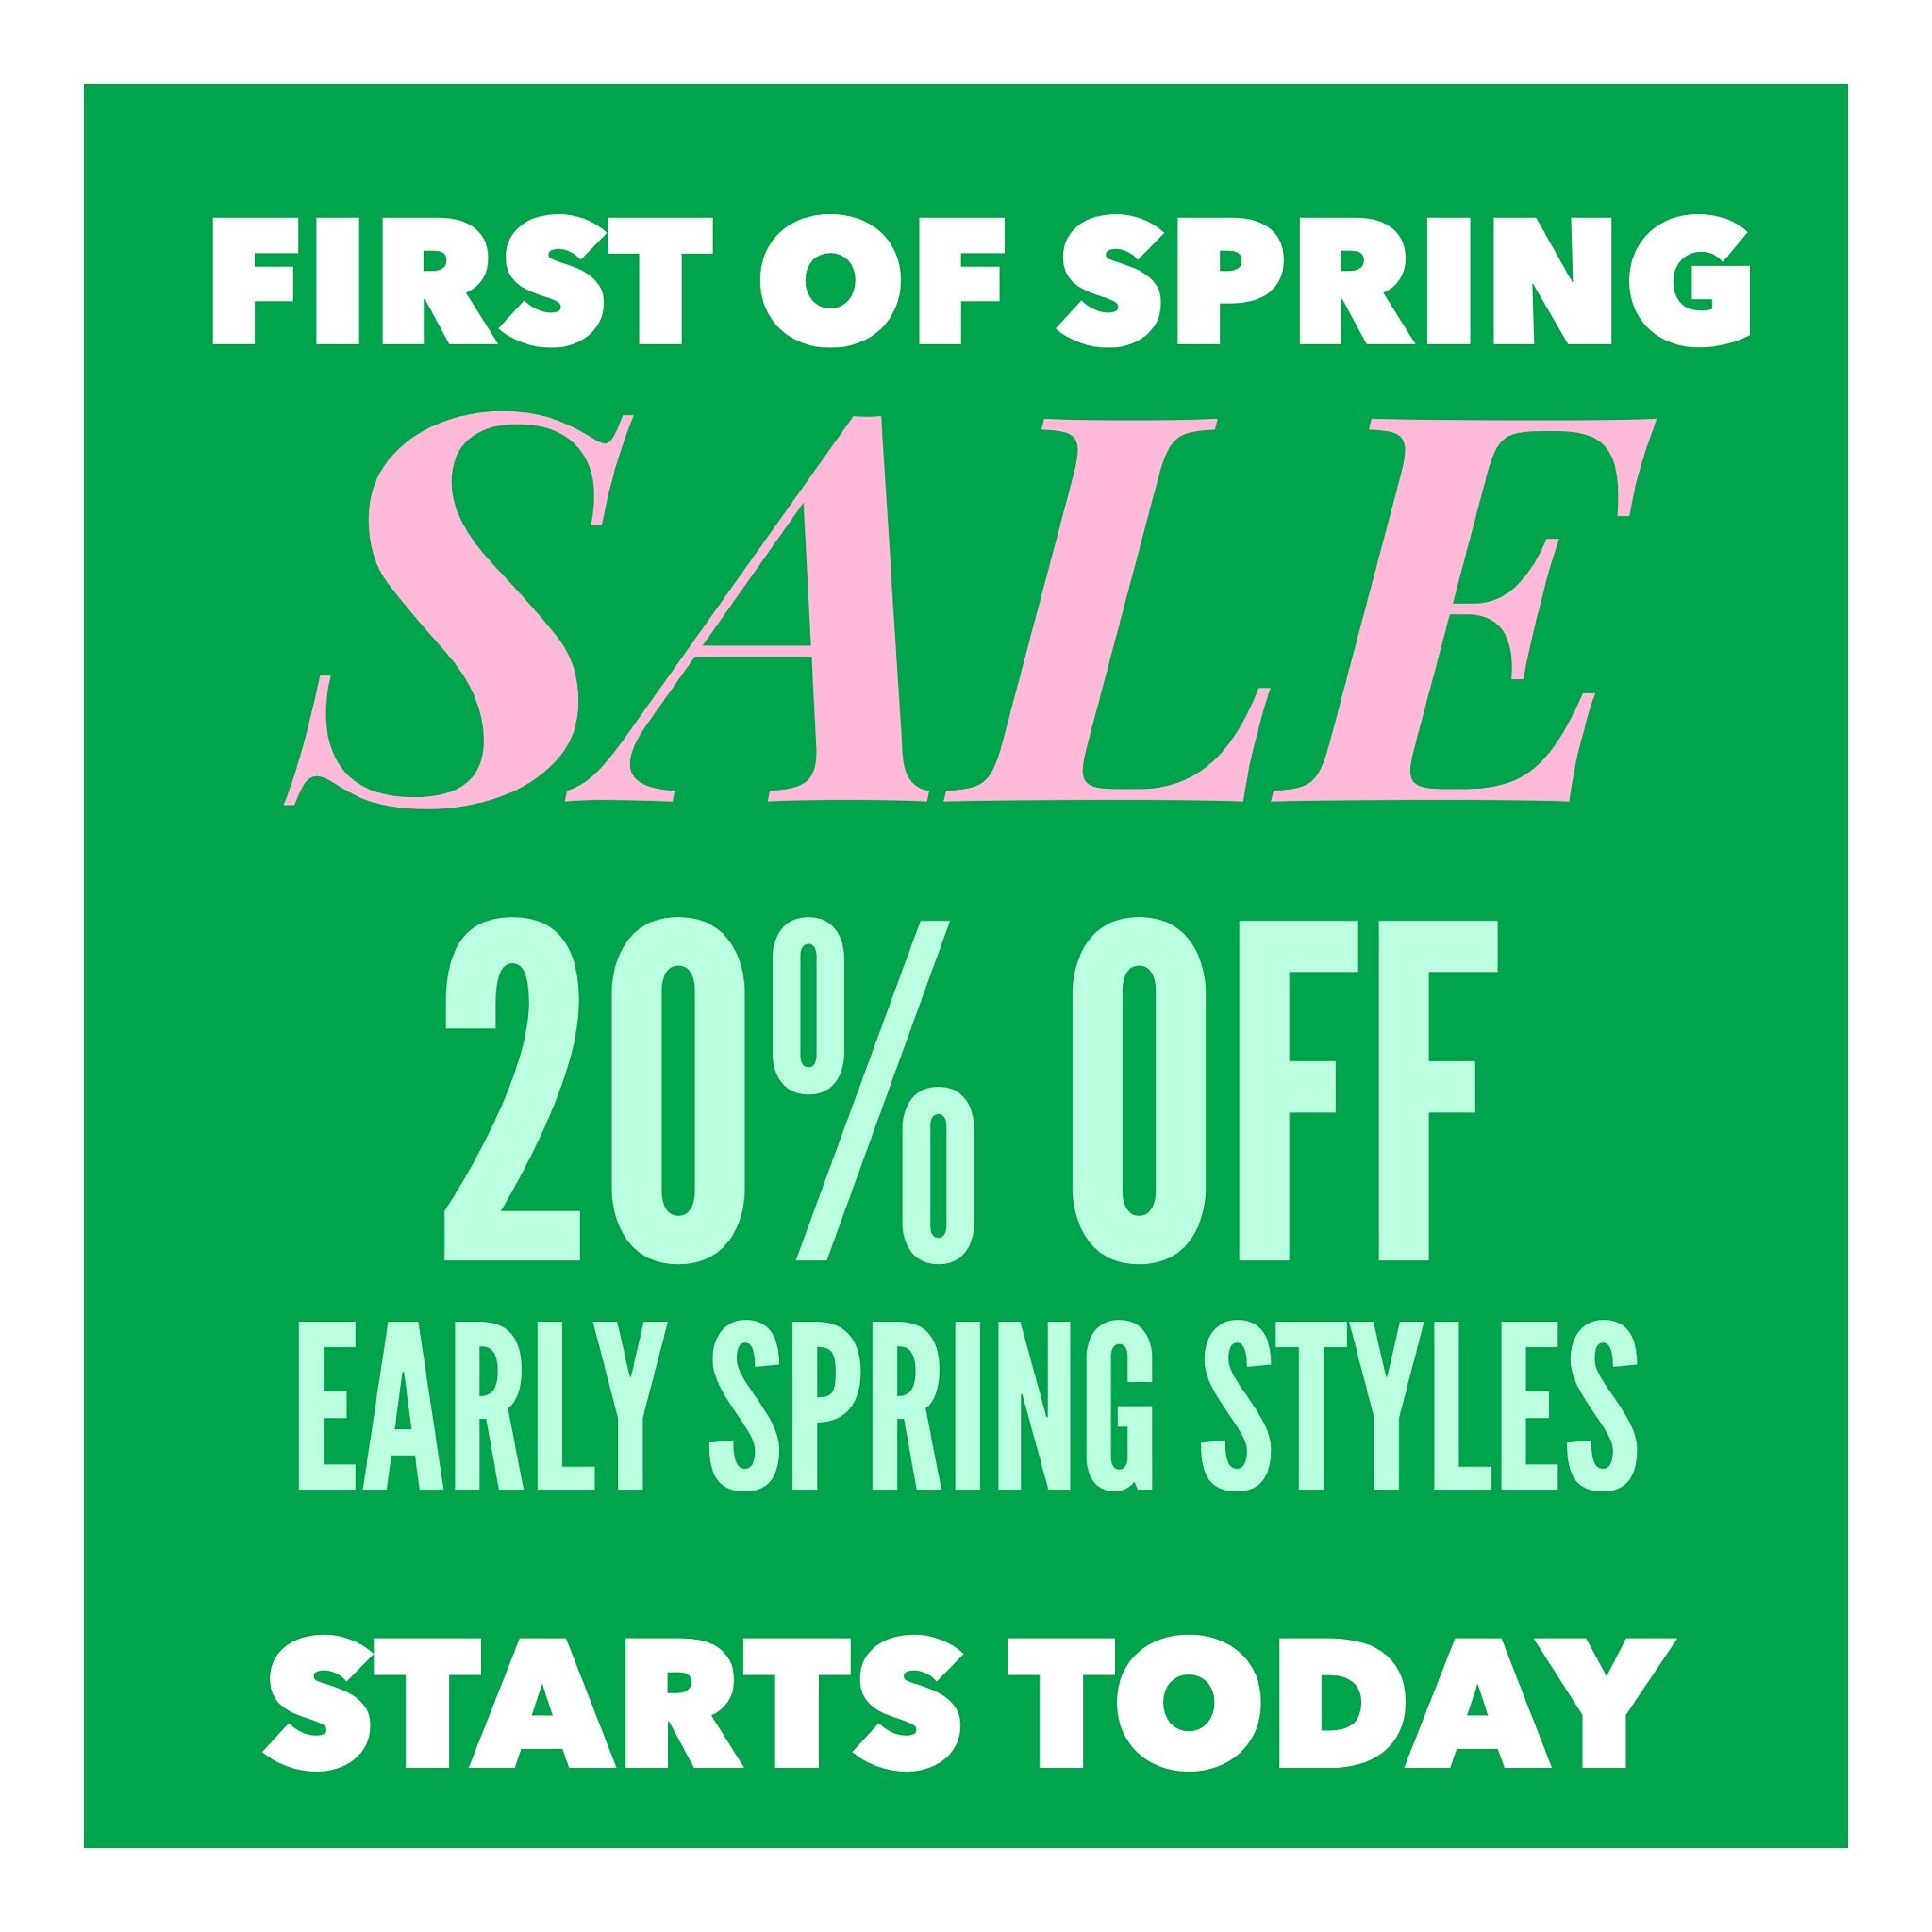 ✨ EARLY SPRING SALE also STARTS TODAY and runs ALL WEEKEND✨